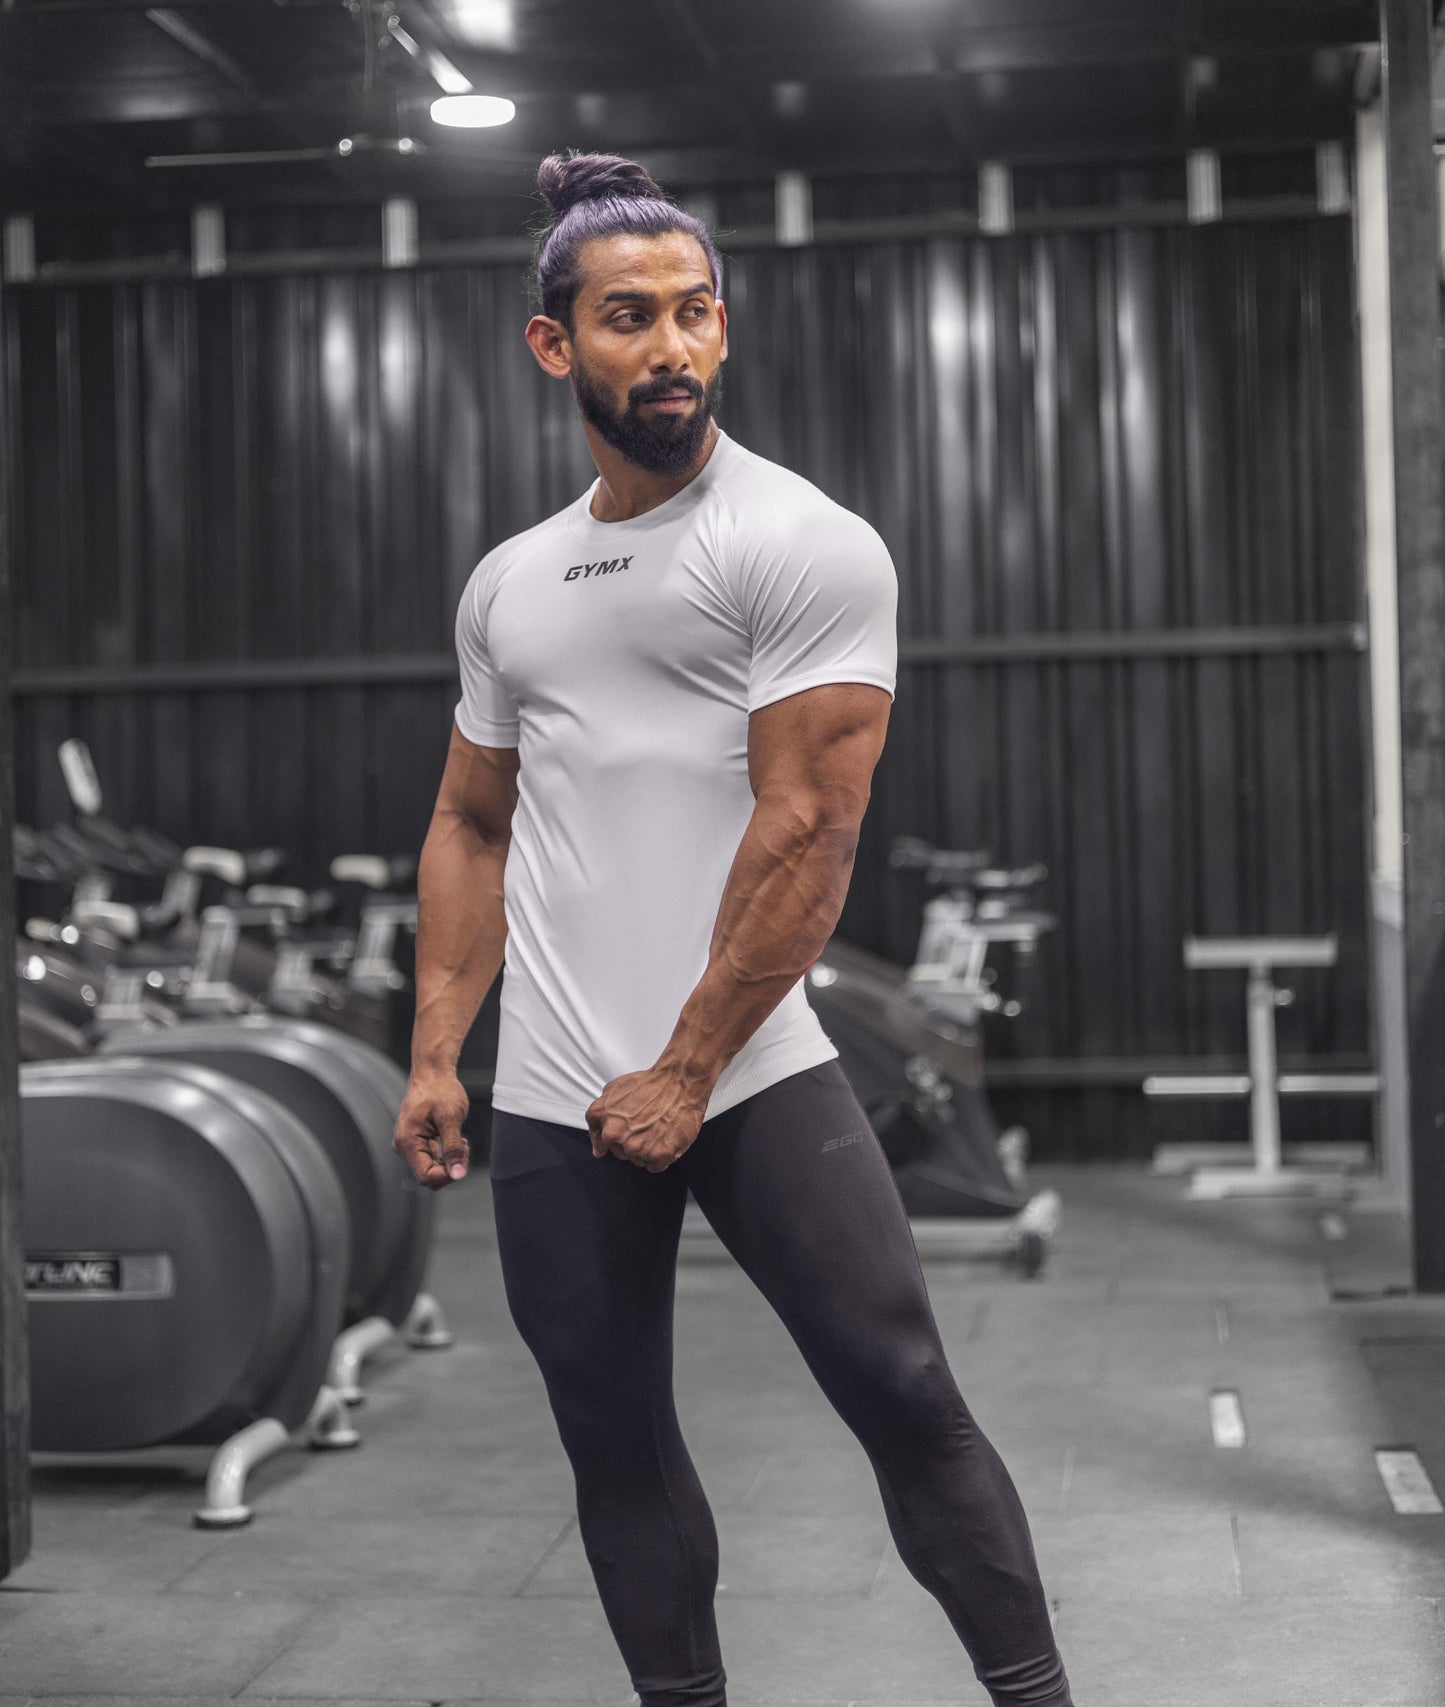 Compression GymX Tee: Frost White